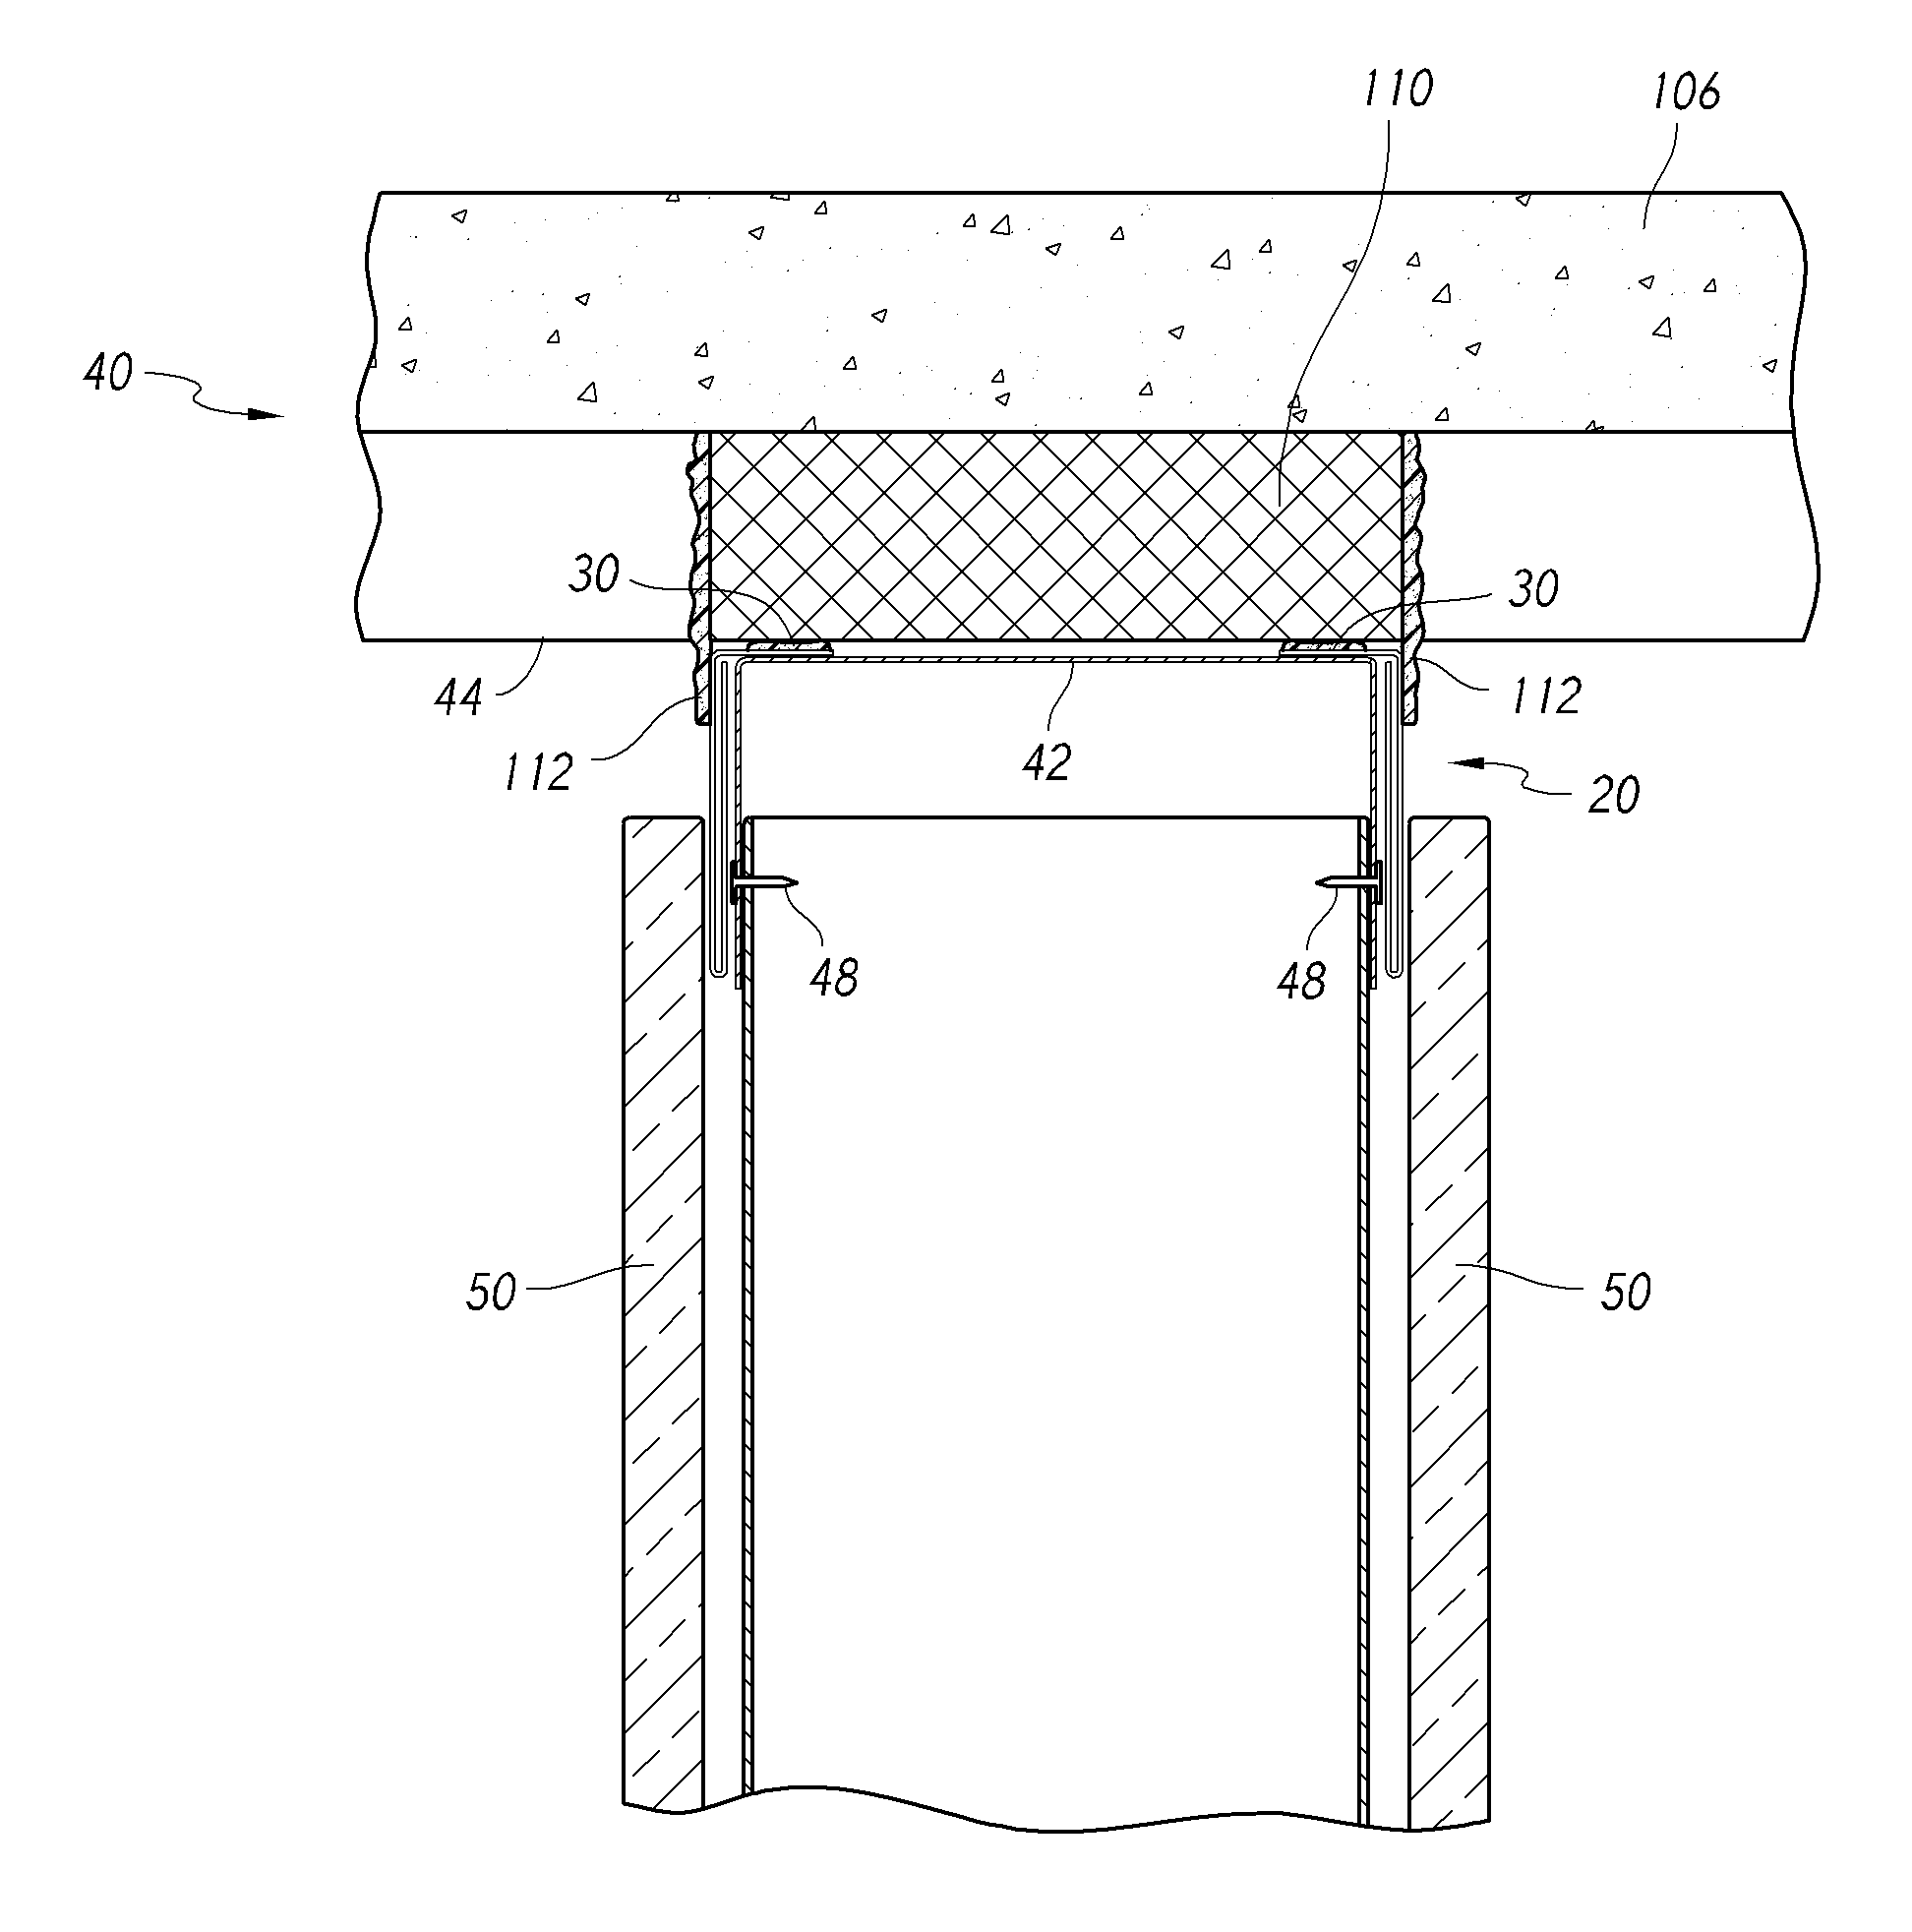 Fire-resistant angle and related assemblies